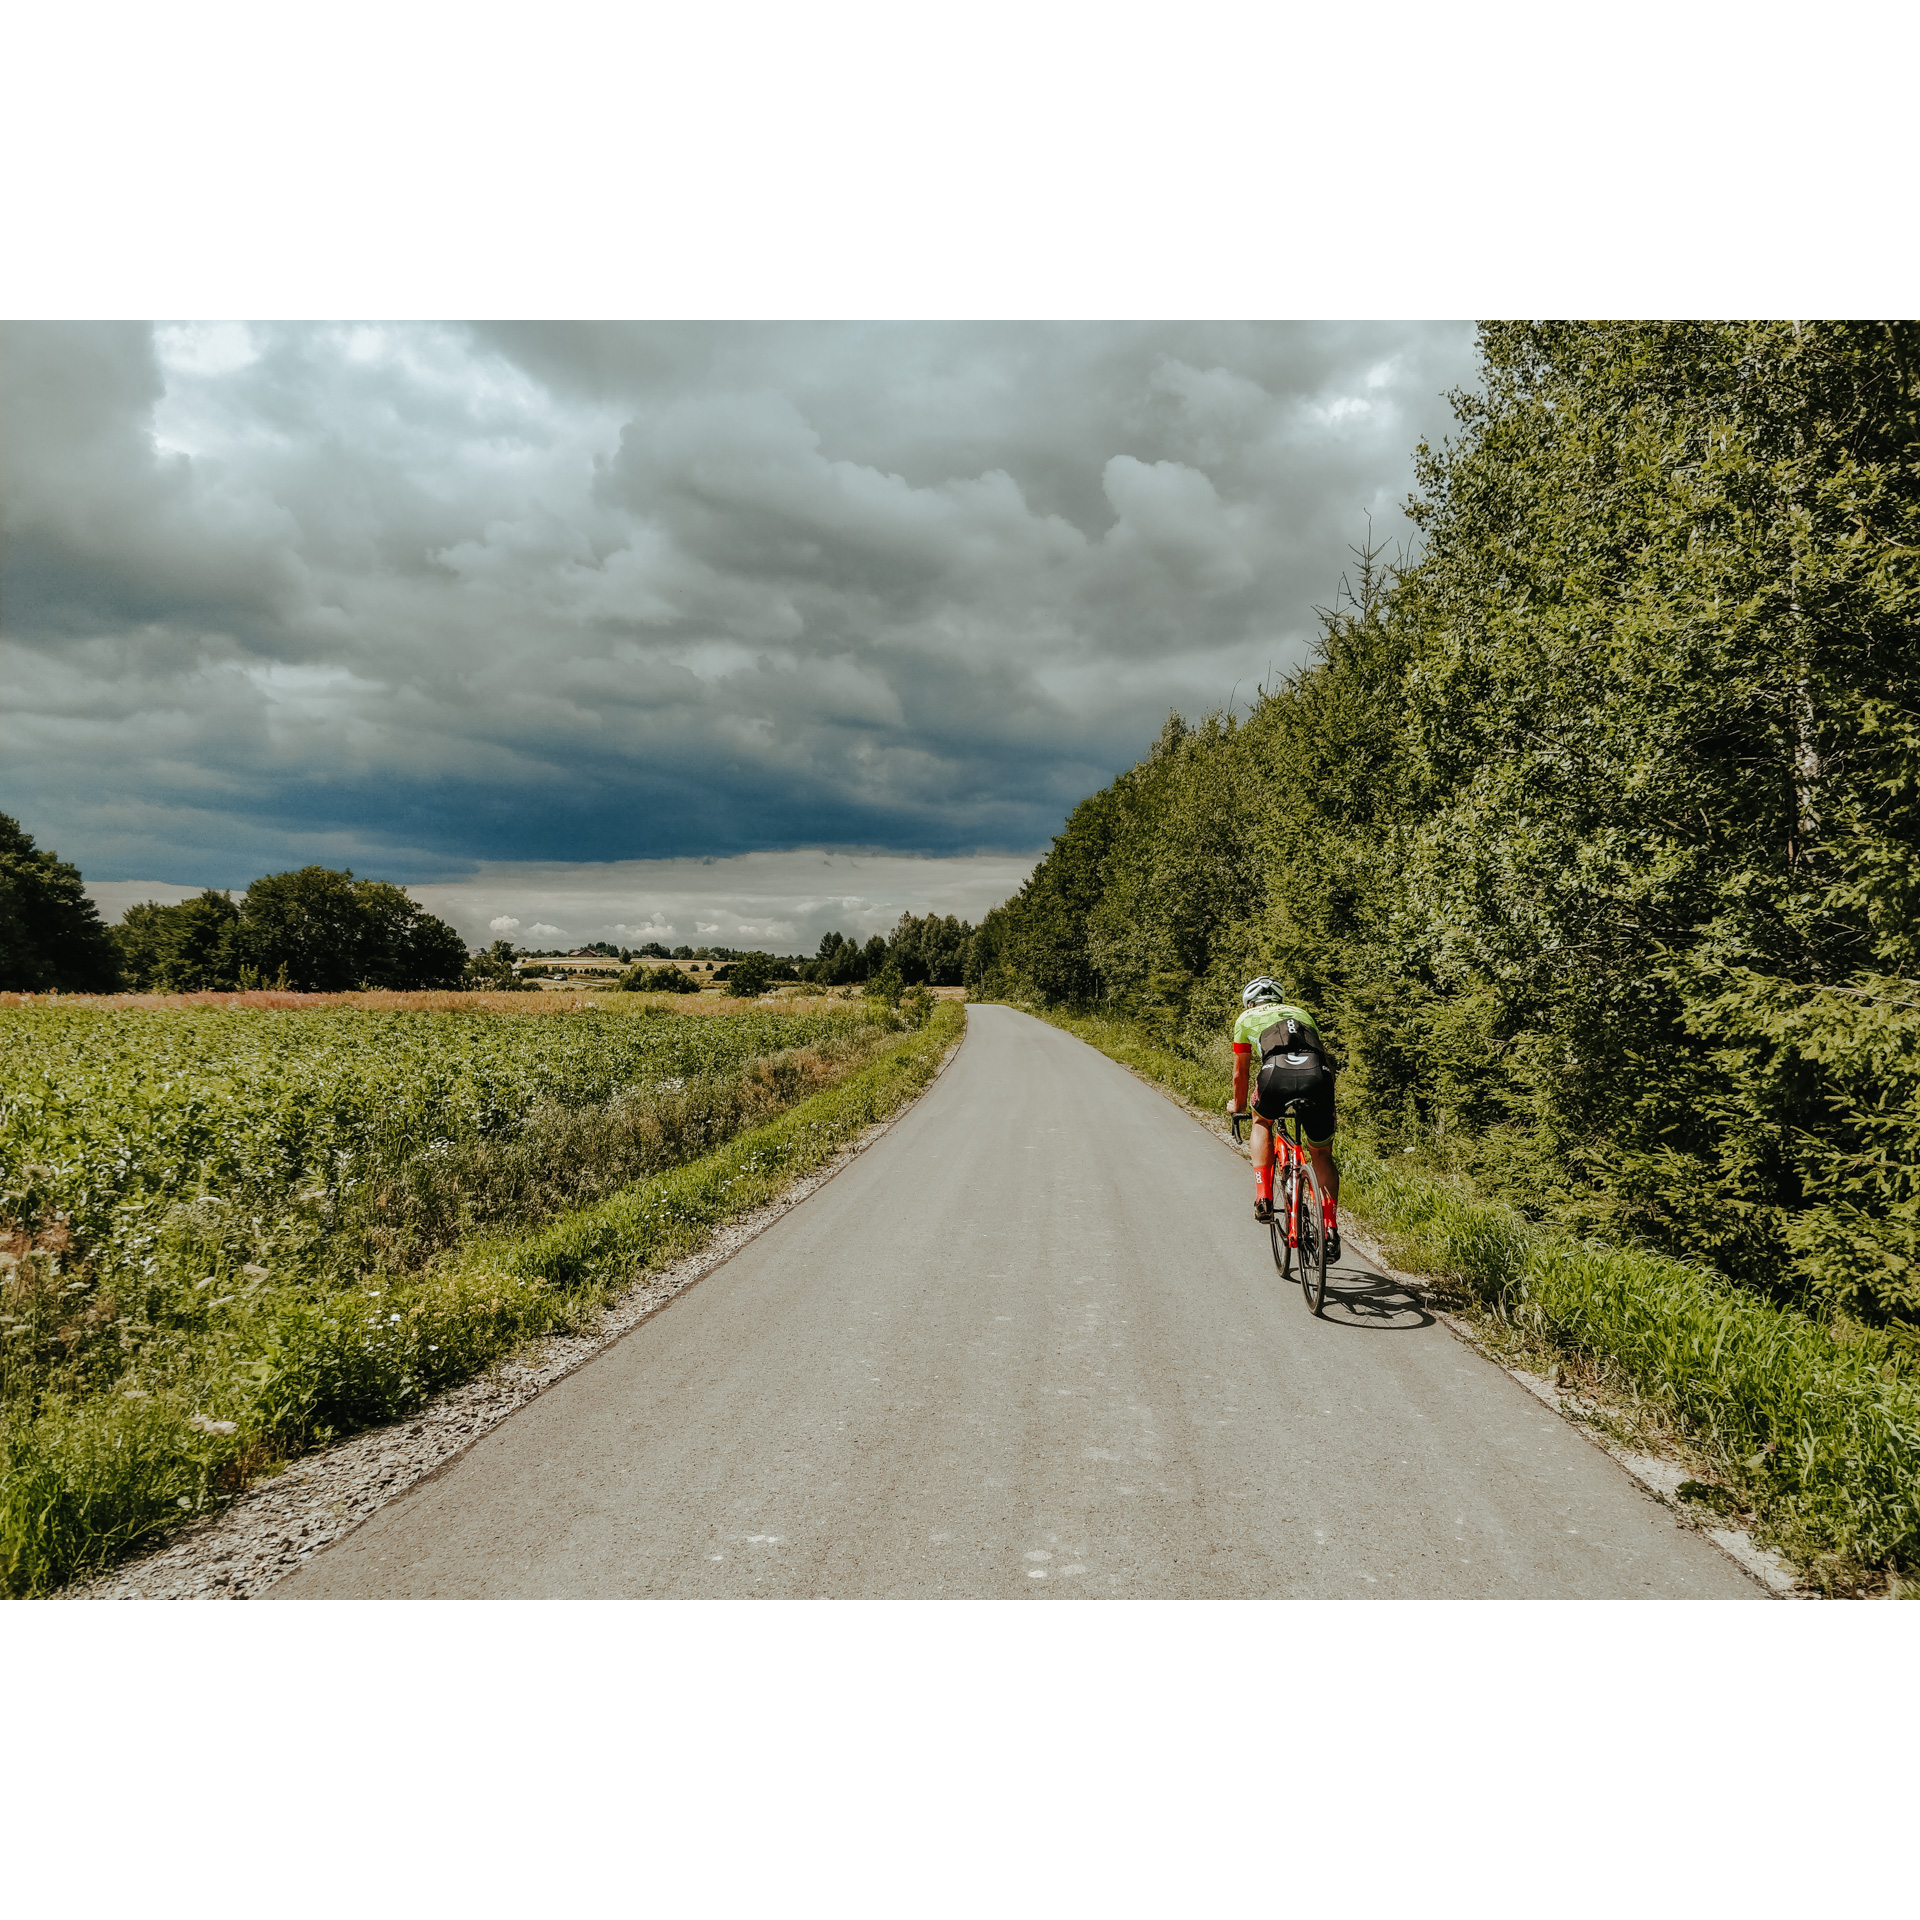 A cyclist in a cycling outfit and a helmet riding an asphalt road along a wall of green trees on the right, farmland on the left, storm clouds in the sky in the background